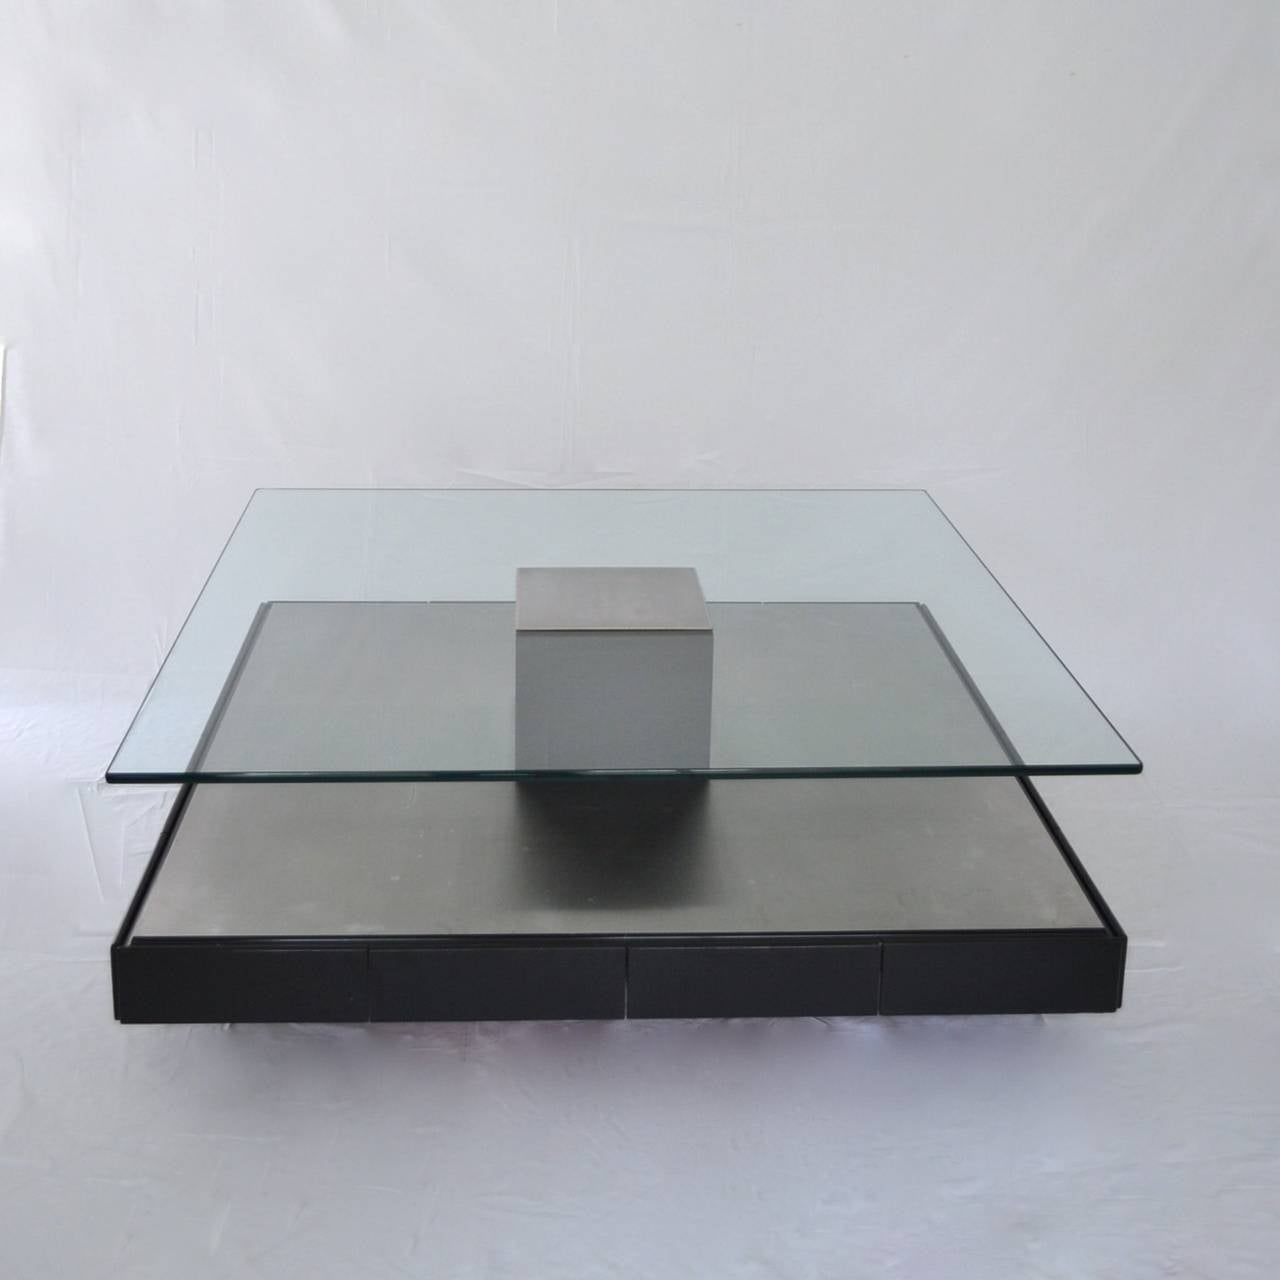 Minimalist Coffee Table model 147 by Marco Fantoni;
Manufactured by Tecno Milano in 1971;
Two Drawers on Each Side with Metal Tag 